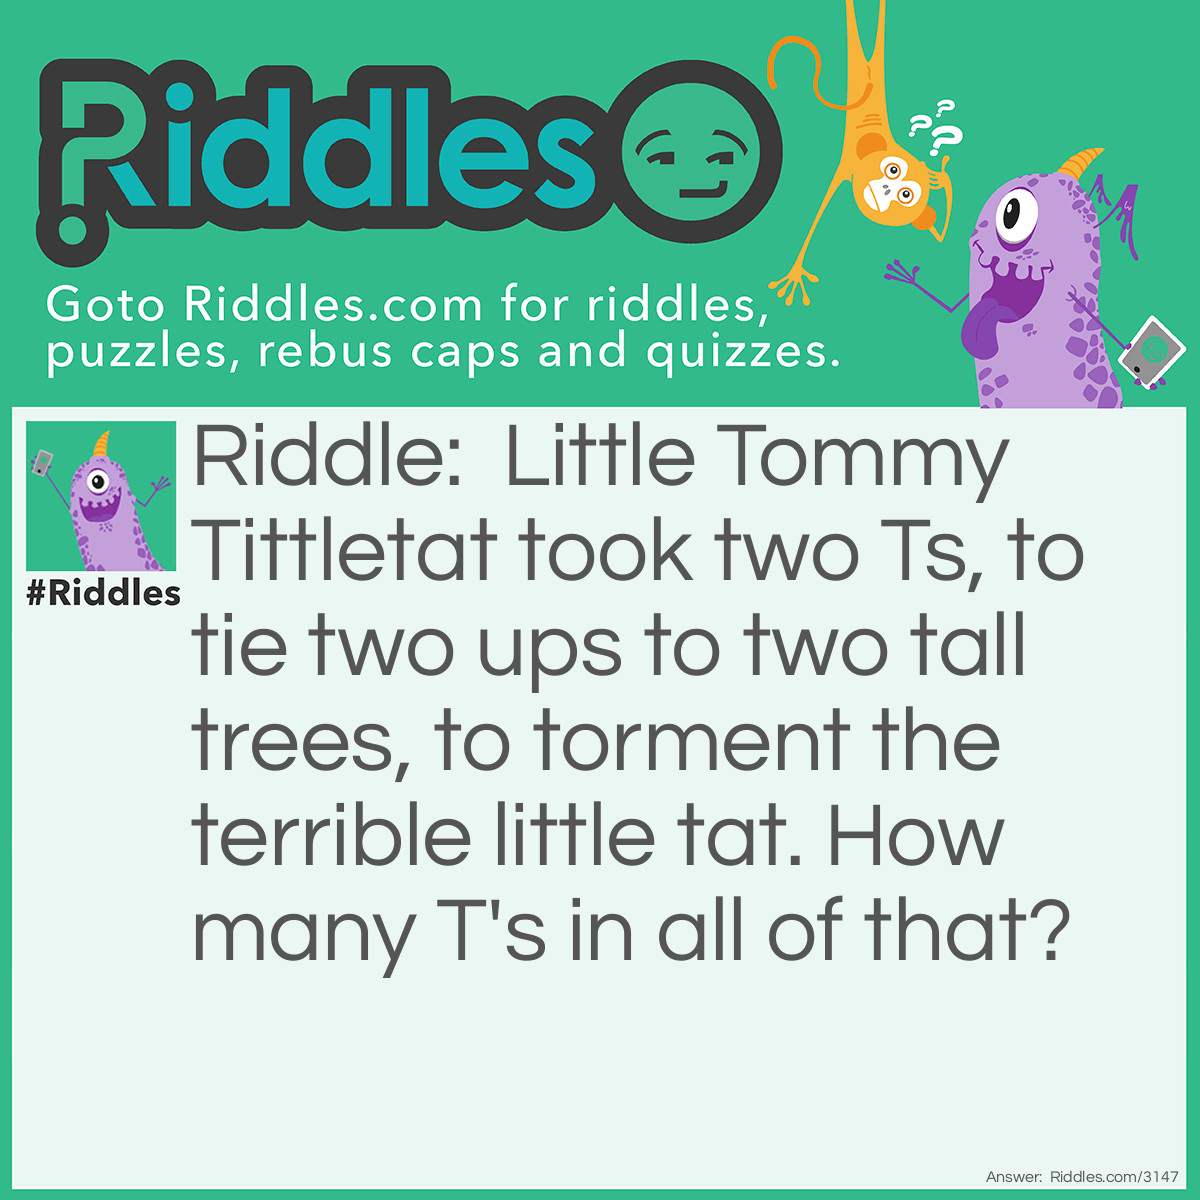 Riddle: Little Tommy Tittletat took two Ts, to tie two ups to two tall trees, to torment the terrible little tat. How many T's in all of that? Answer: There are 2 T's in all of <strong>T</strong>ha<strong>t</strong>.